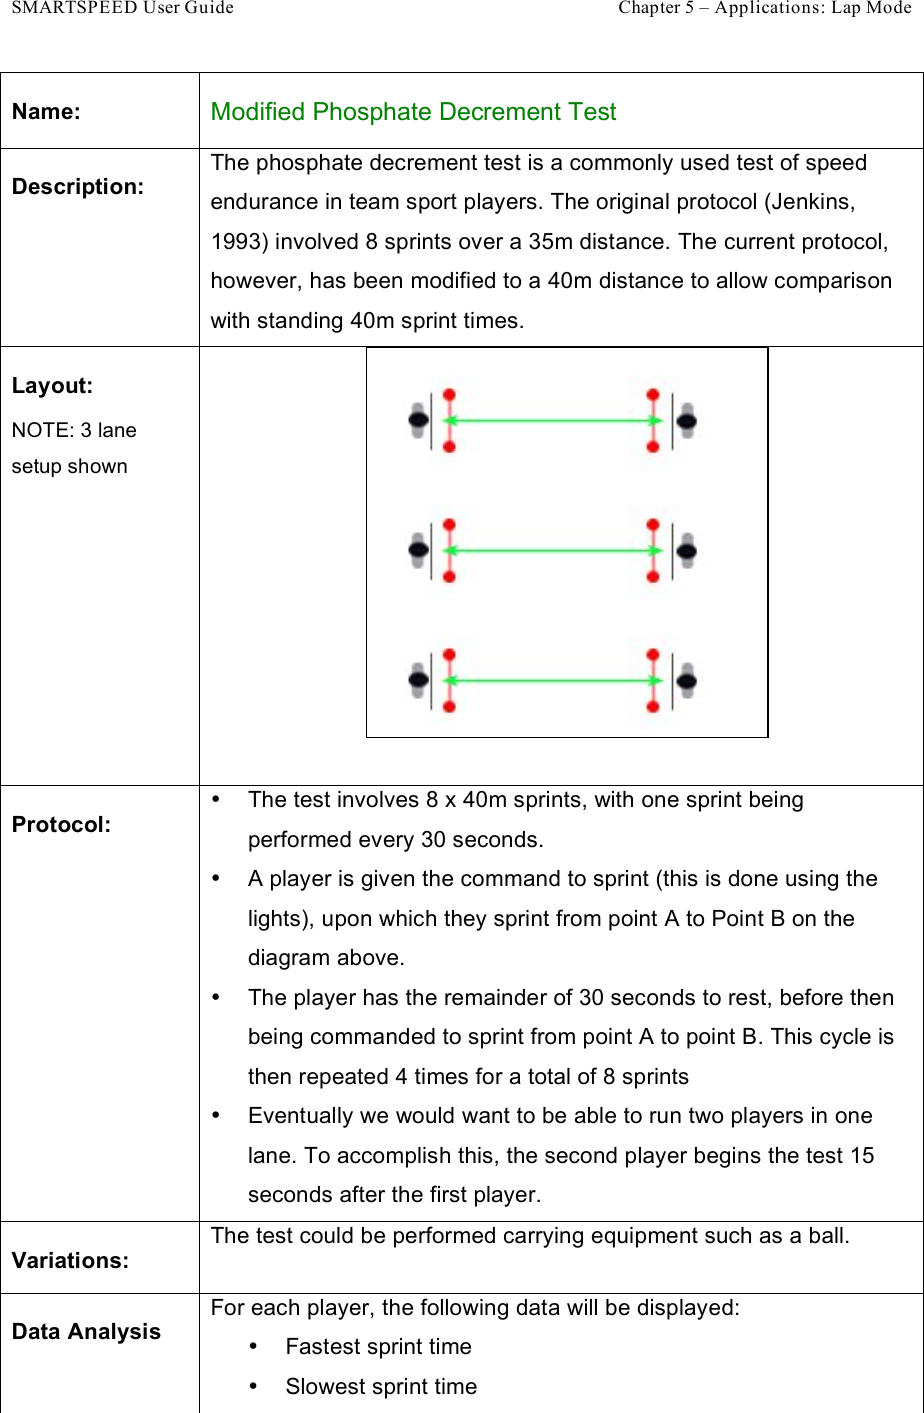 SMARTSPEED User Guide    Chapter 5 – Applications: Lap Mode Name: Modified Phosphate Decrement Test Description: The phosphate decrement test is a commonly used test of speed endurance in team sport players. The original protocol (Jenkins, 1993) involved 8 sprints over a 35m distance. The current protocol, however, has been modified to a 40m distance to allow comparison with standing 40m sprint times. Layout: NOTE: 3 lane setup shown  Protocol: •  The test involves 8 x 40m sprints, with one sprint being performed every 30 seconds. •  A player is given the command to sprint (this is done using the lights), upon which they sprint from point A to Point B on the diagram above. •  The player has the remainder of 30 seconds to rest, before then being commanded to sprint from point A to point B. This cycle is then repeated 4 times for a total of 8 sprints •  Eventually we would want to be able to run two players in one lane. To accomplish this, the second player begins the test 15 seconds after the first player. Variations: The test could be performed carrying equipment such as a ball. Data Analysis For each player, the following data will be displayed: •  Fastest sprint time •  Slowest sprint time 